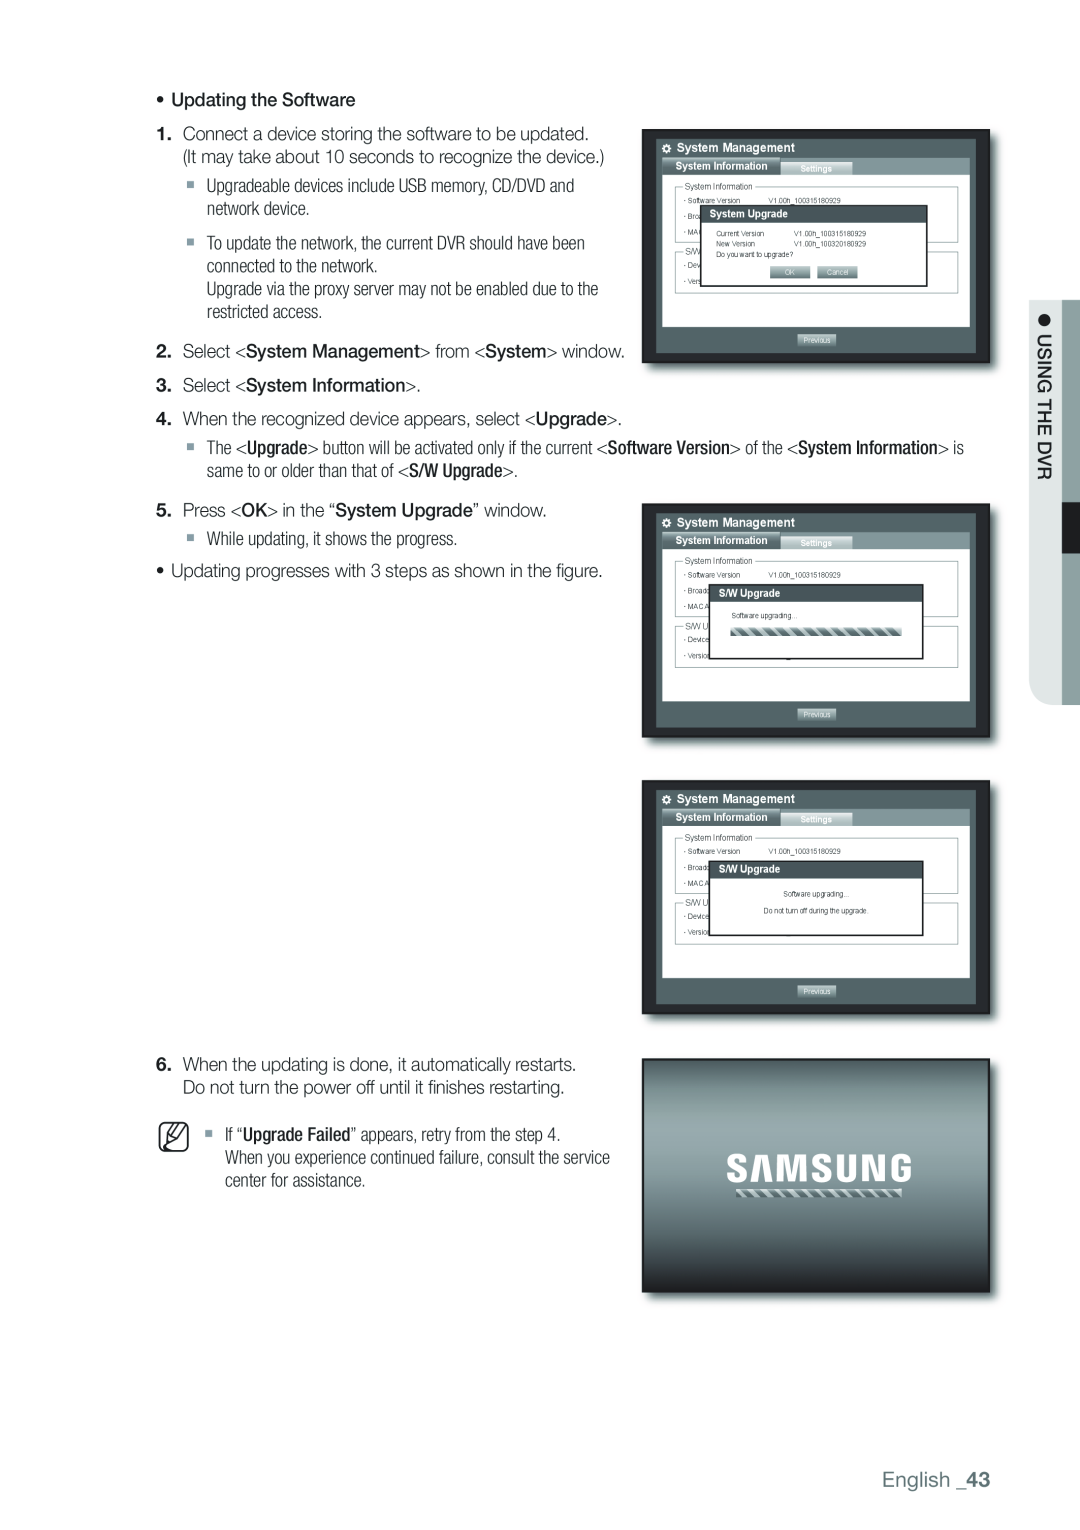 Samsung SRD-850D, 870D, 1670D, SRD-830D, SRD-1650D, SRD-1630D, SRD-1610D user manual English, ~ Updating the Software 